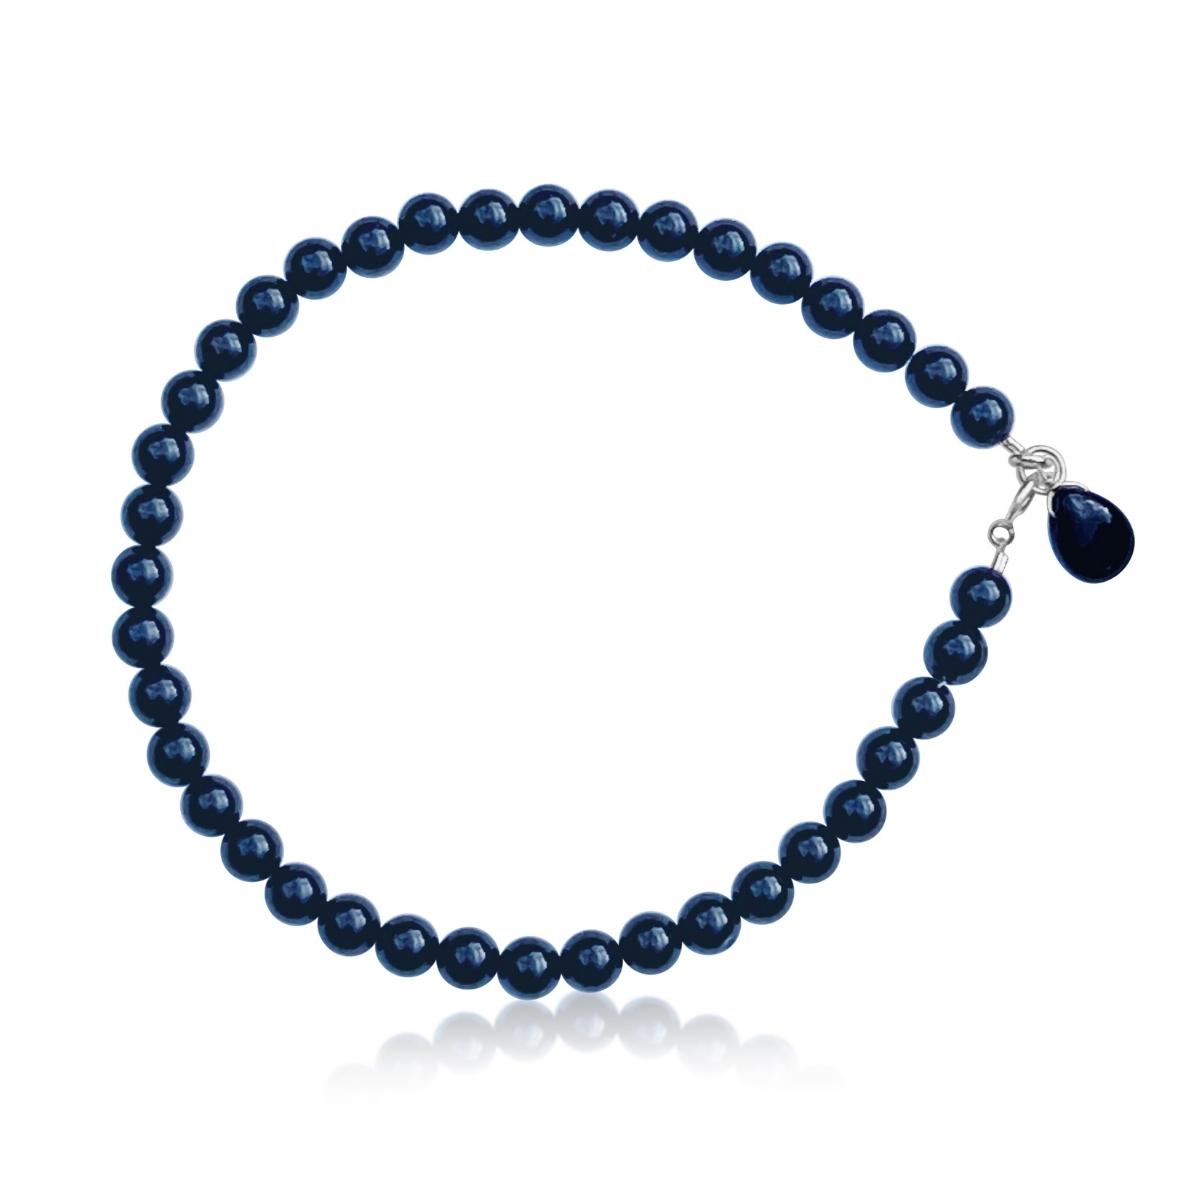 Mindful Willpower - Onyx Anklet   Onyx helps one have self-control and anchors one’s flighty energy into a more stable way of life.